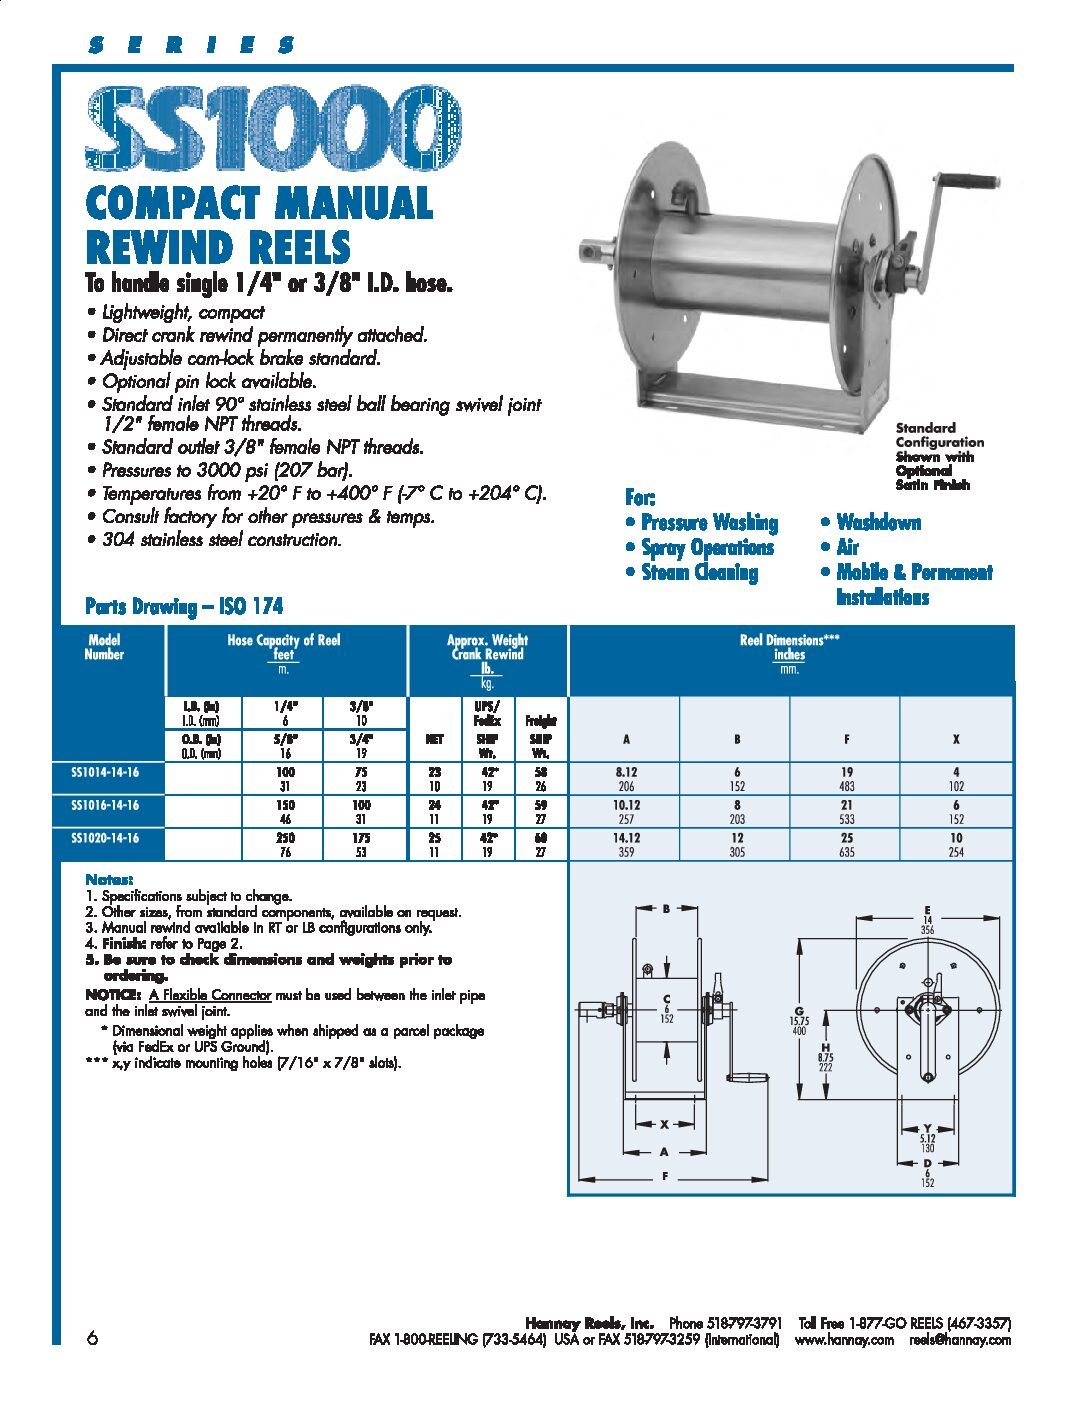 Hannay Stainless Steel 1000 Series manual Hose Reels technical inofrmation